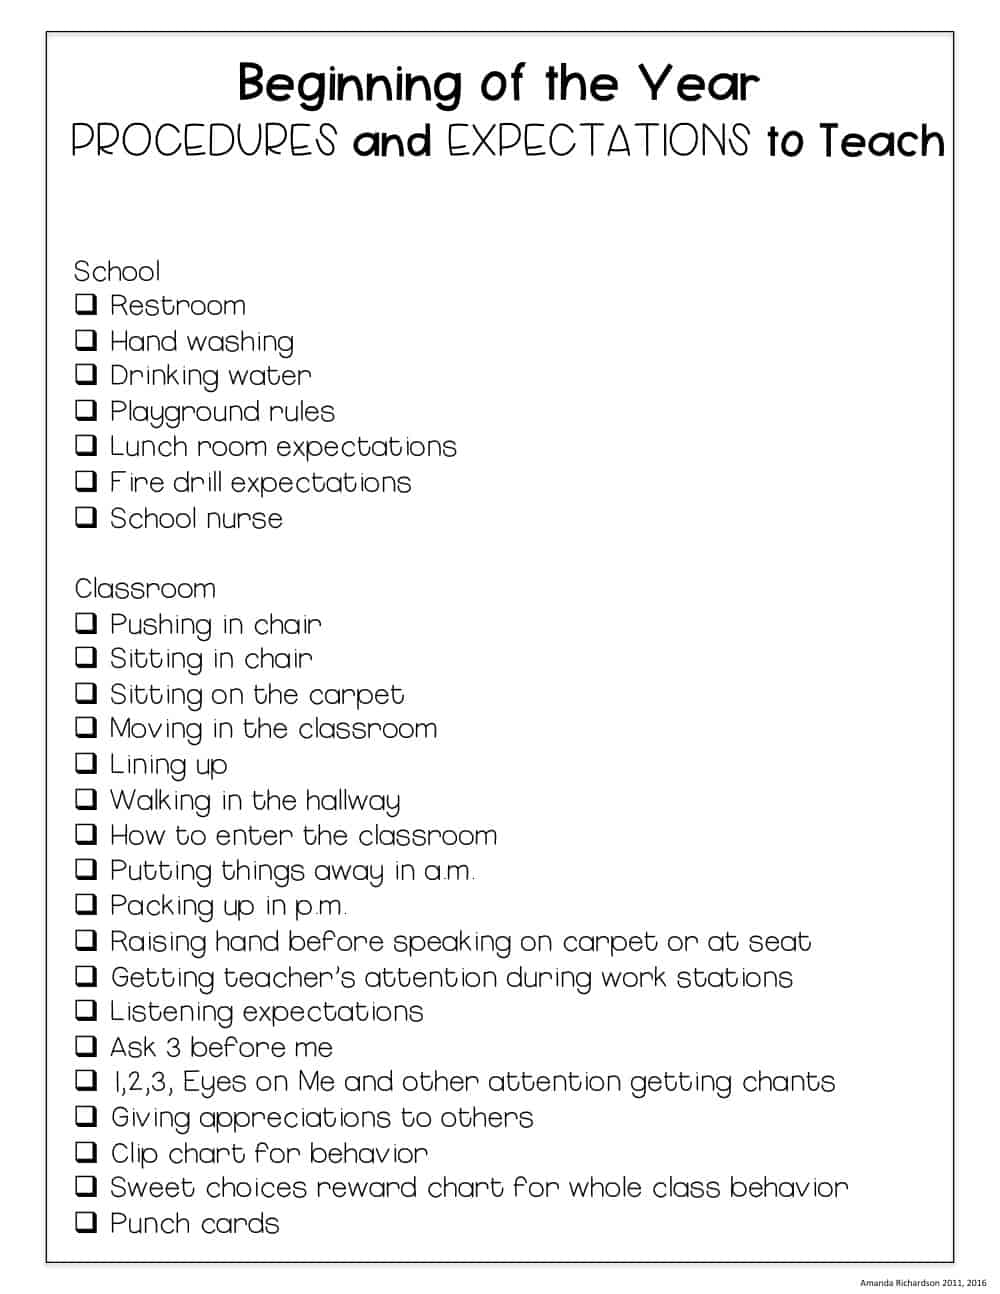 Beginning of year classroom expectations and procedures to teach. This list has it all! Perfect to check off as you cover each!